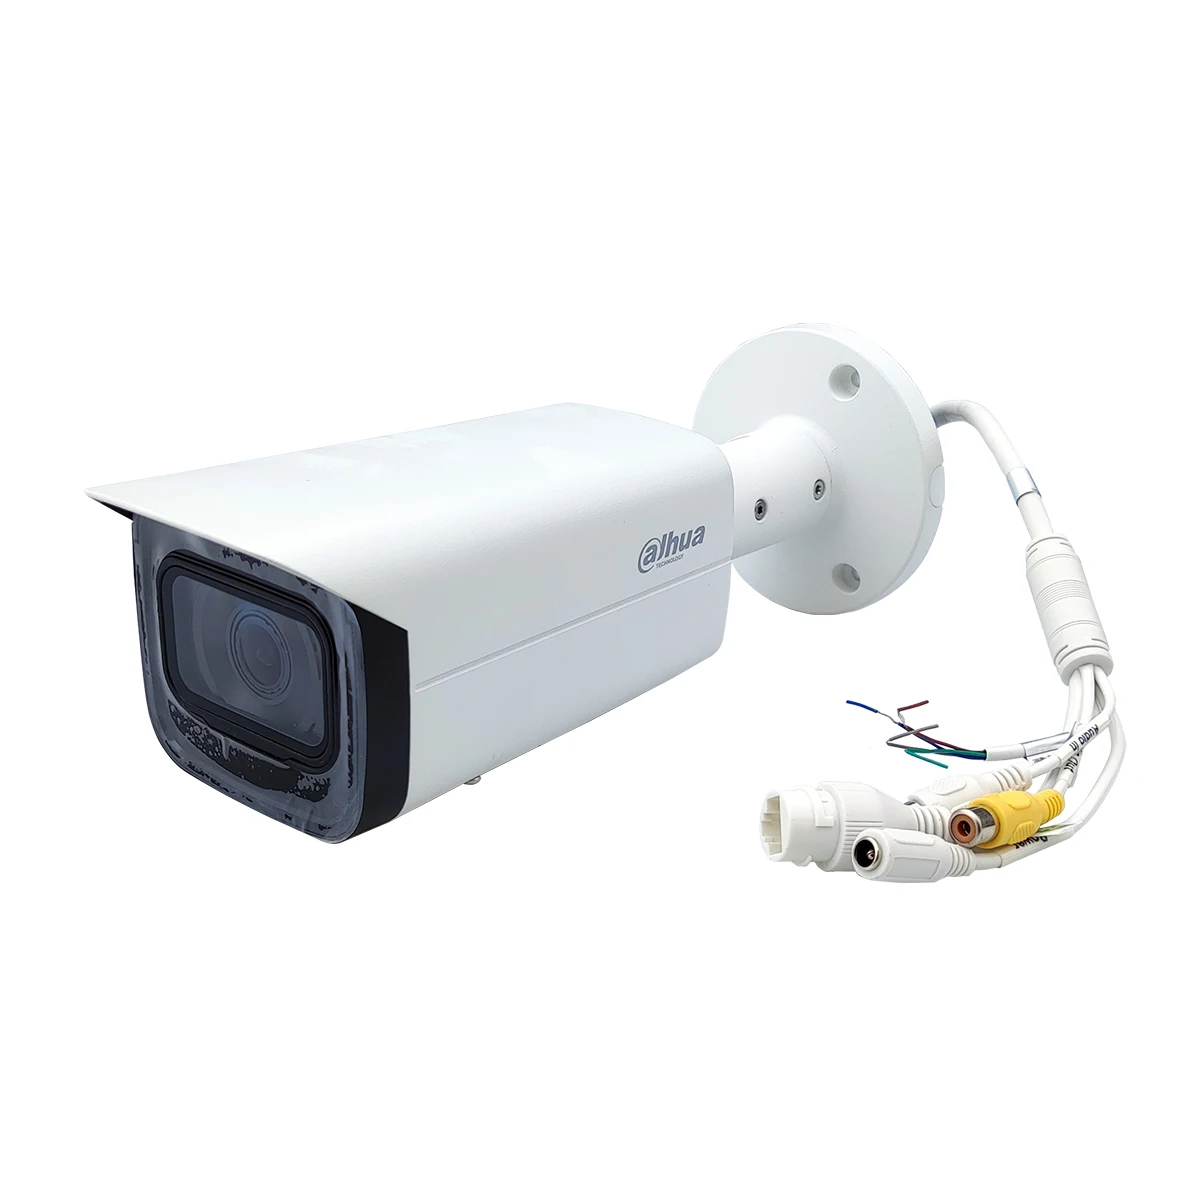 

Dahua DH-IPC-HFW5541TP-ASE-S2 5MP People Counting IP PoE Bullet WizMind Network Smart AI Camera